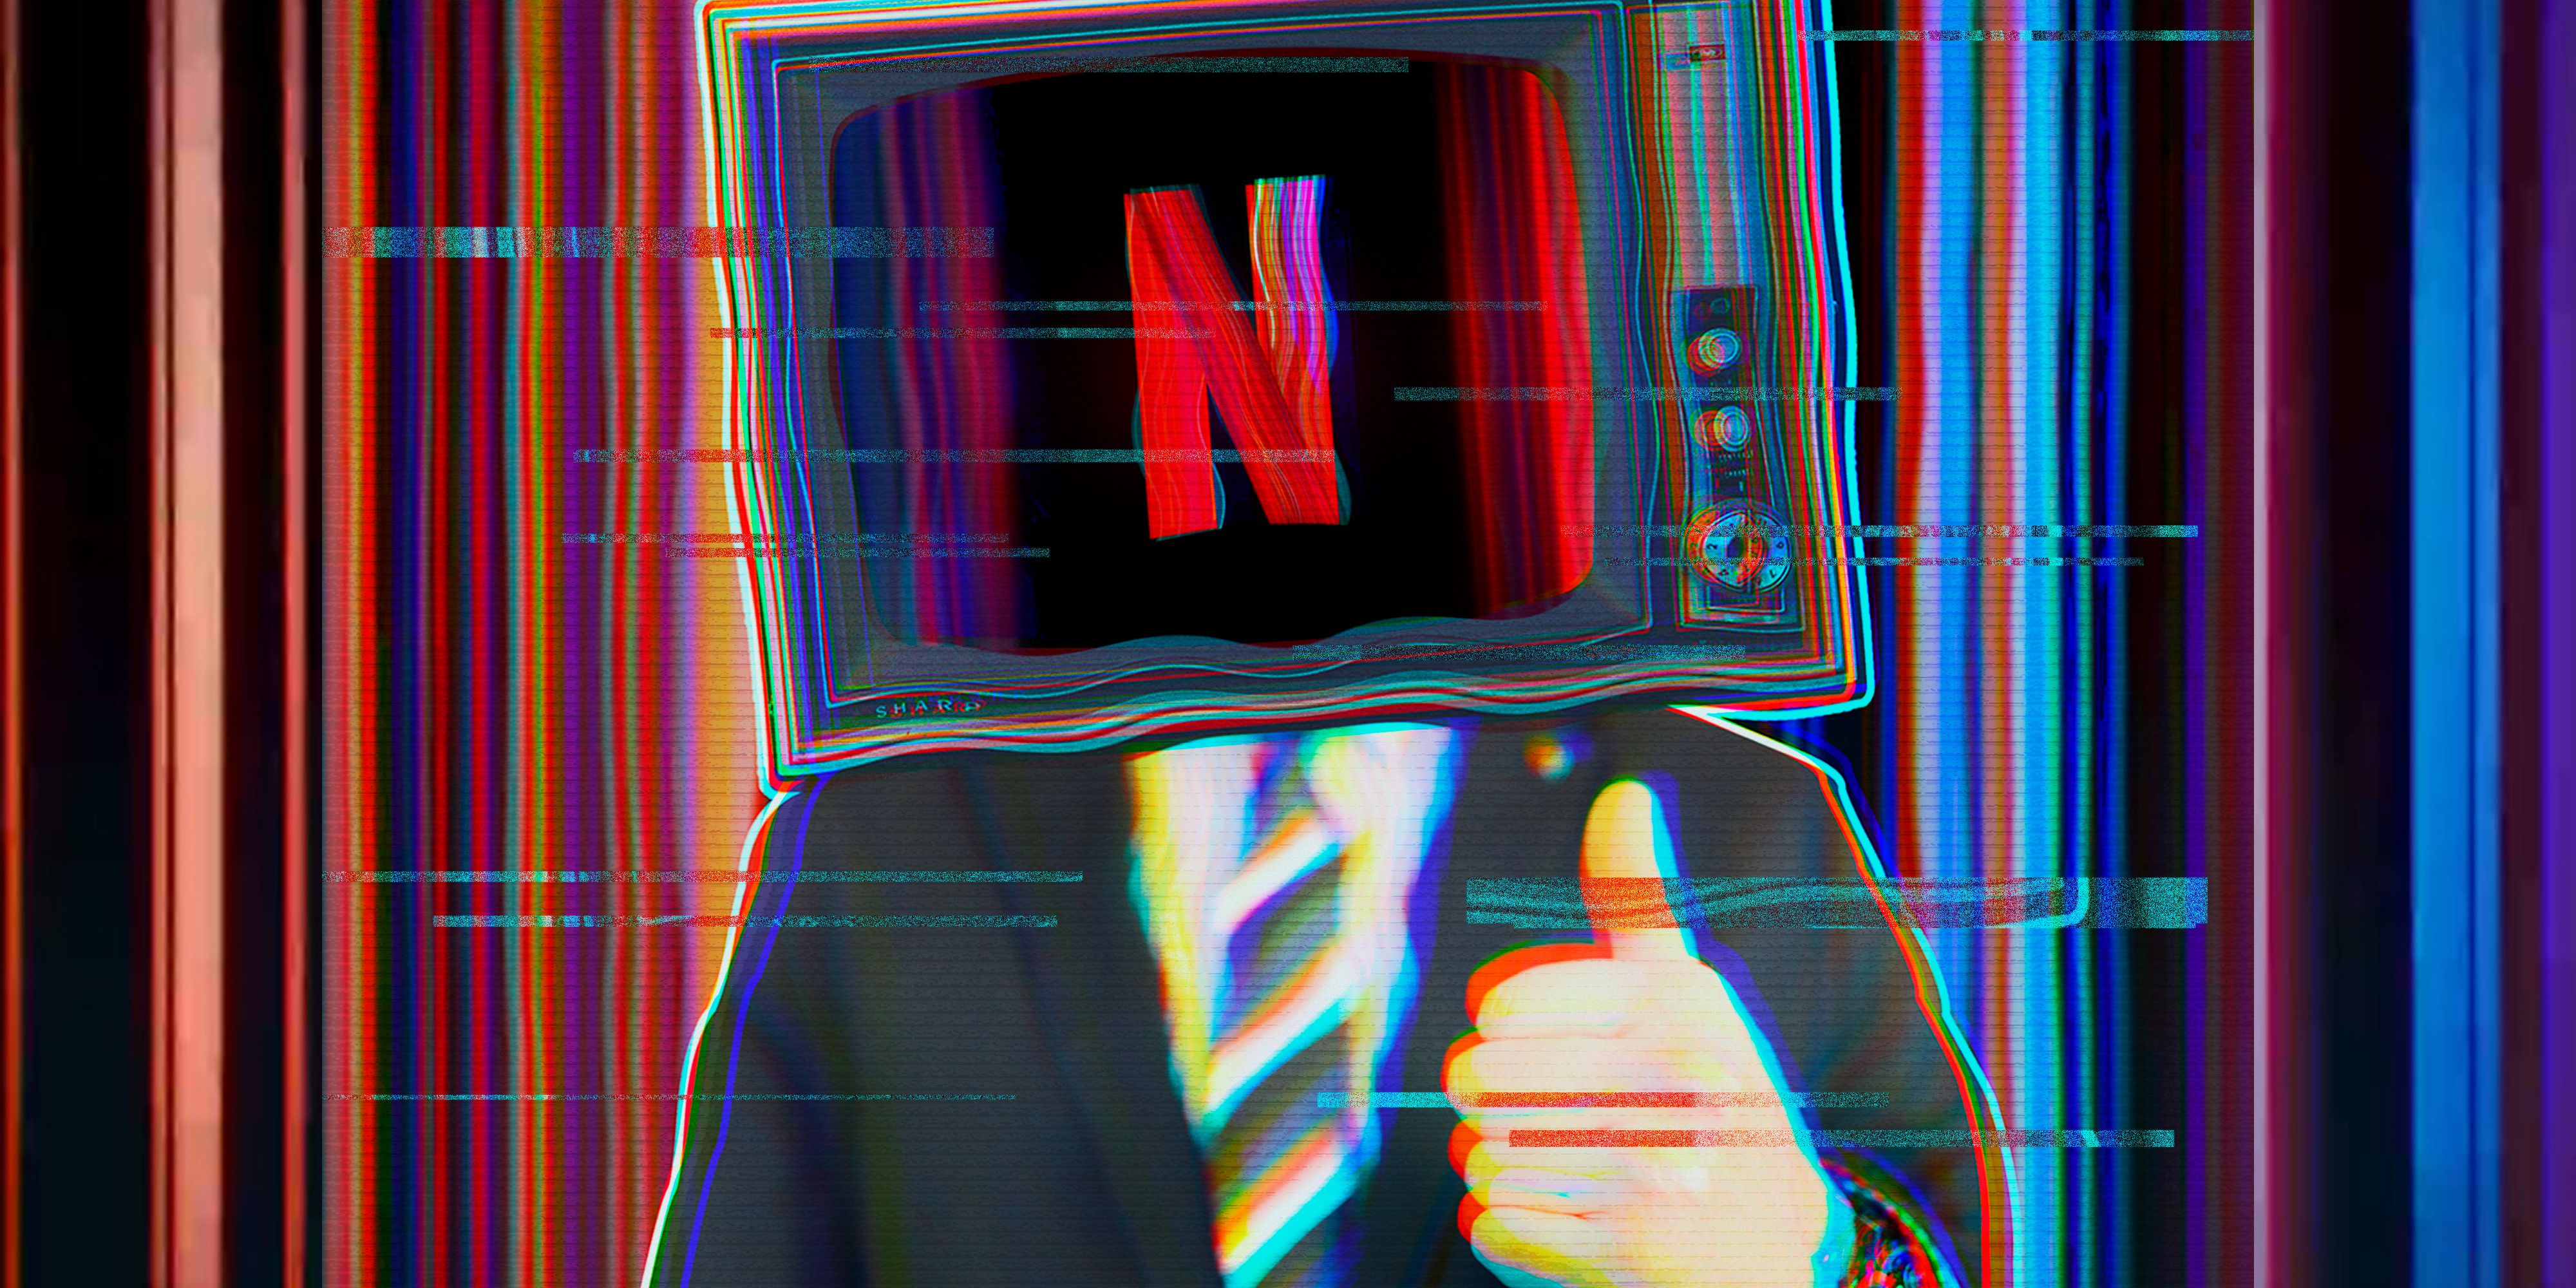 A person in a suit giving a thumbs up with a TV for a head, and the Netflix logo displayed on the screen.